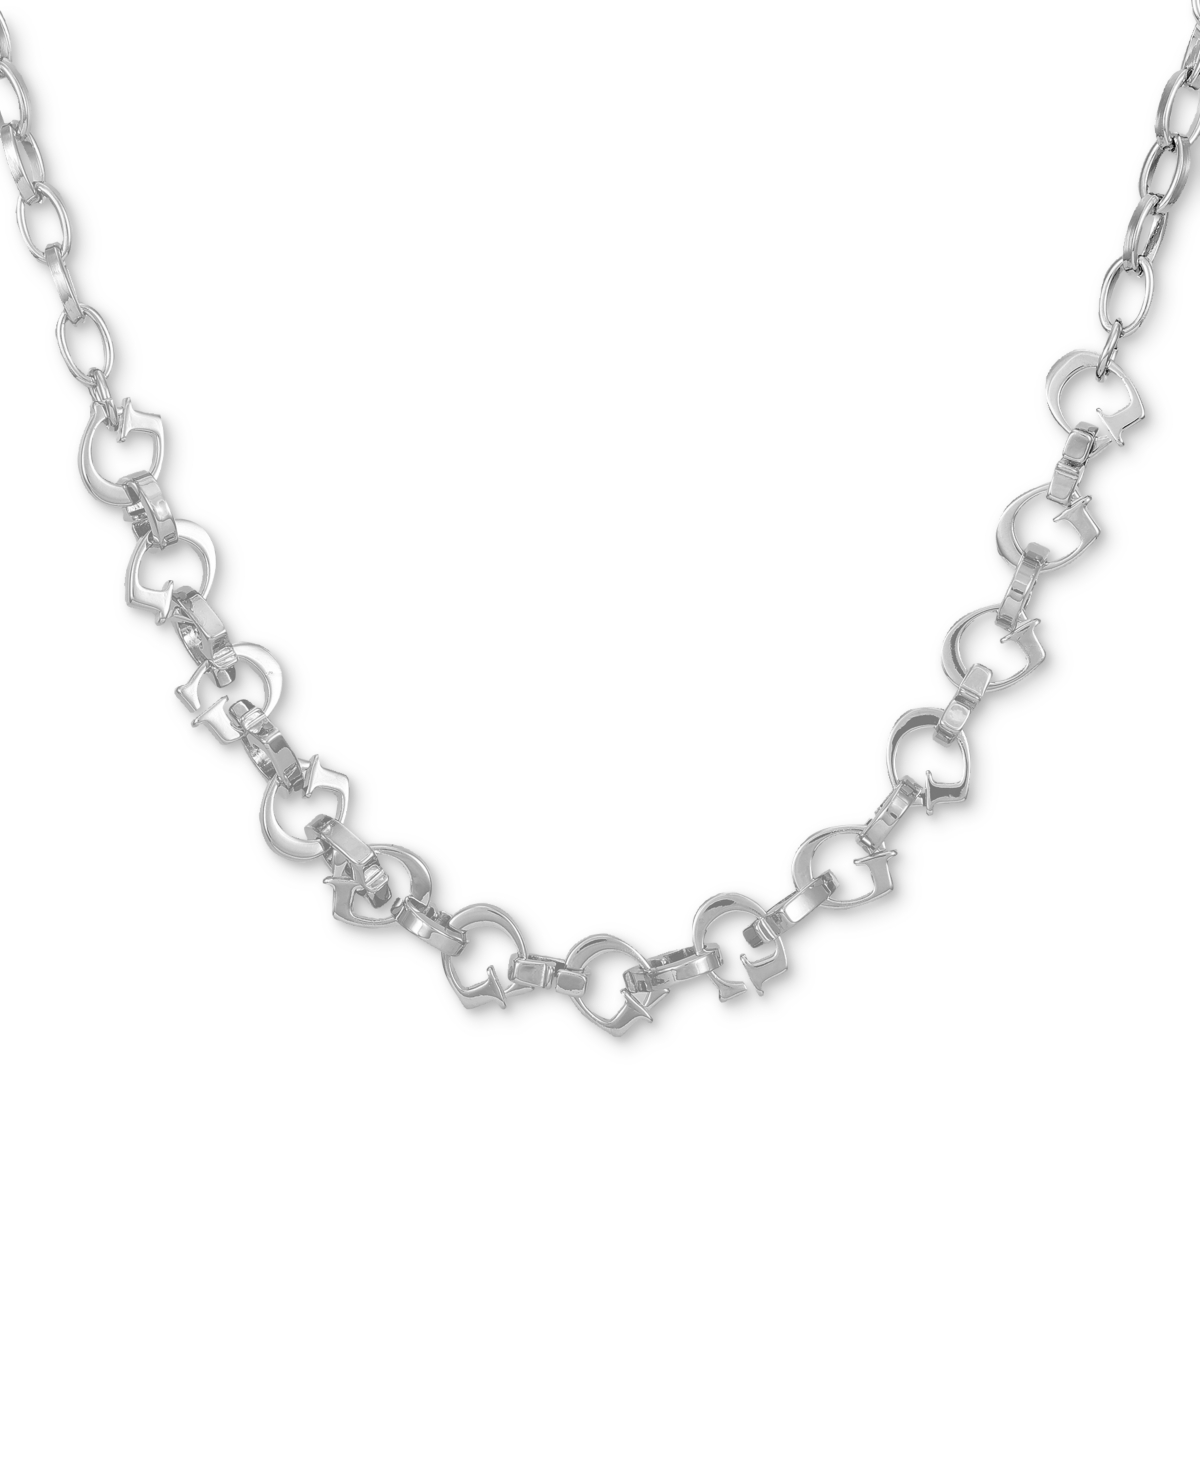 Guess Silver-tone Alternating G Link Collar Necklace, 16" + 2" Extender